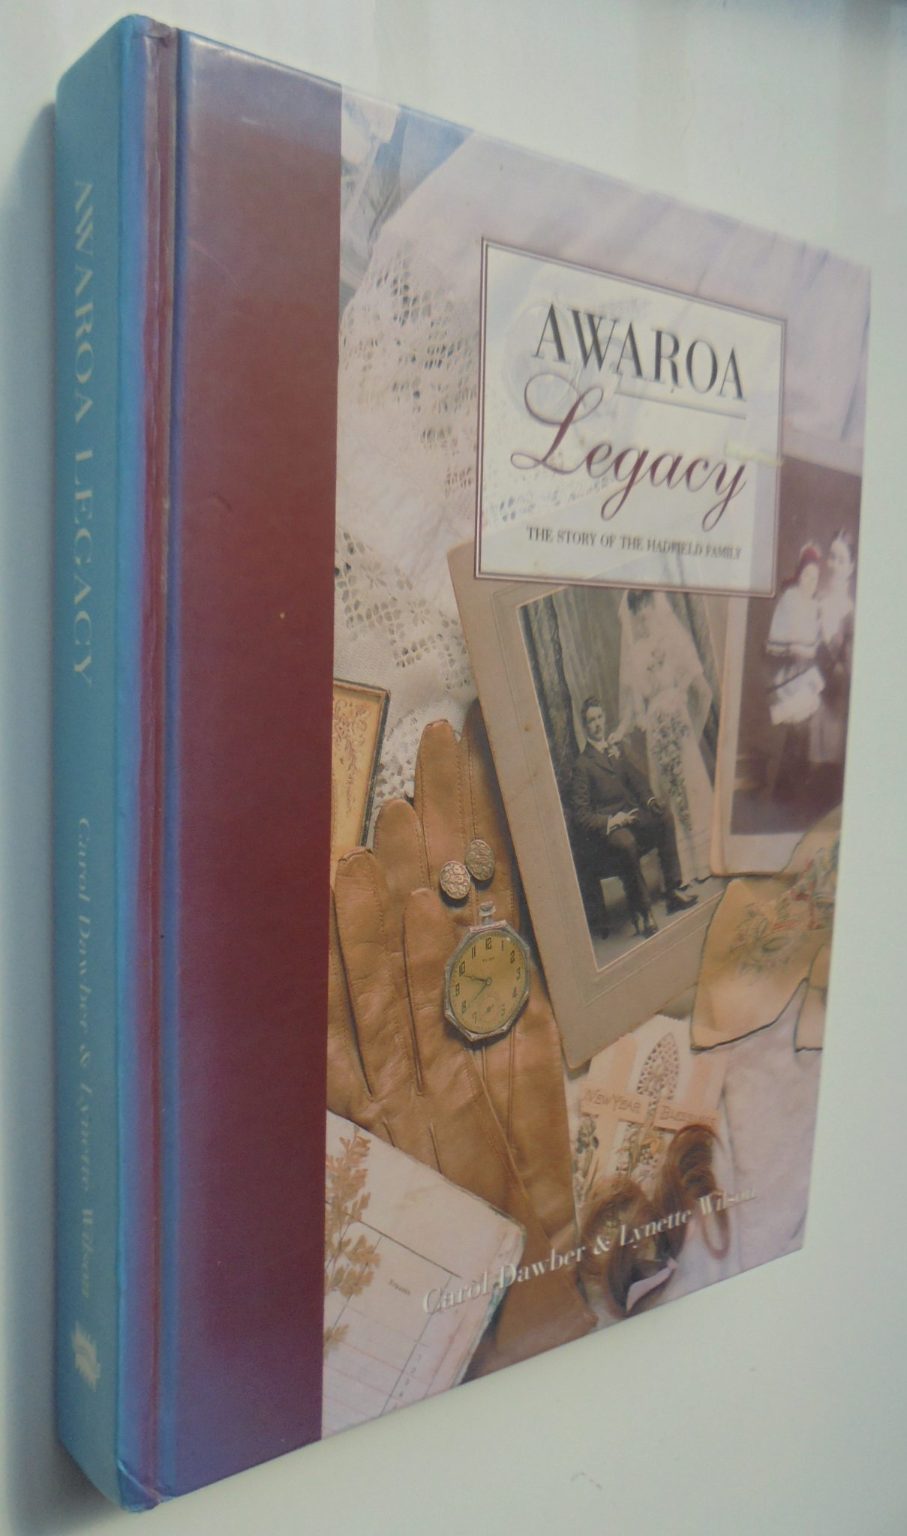 AWAROA Legacy The Story Of the Hadfield Family. By Carol Dawber & Lynette Wilson. SIGNED